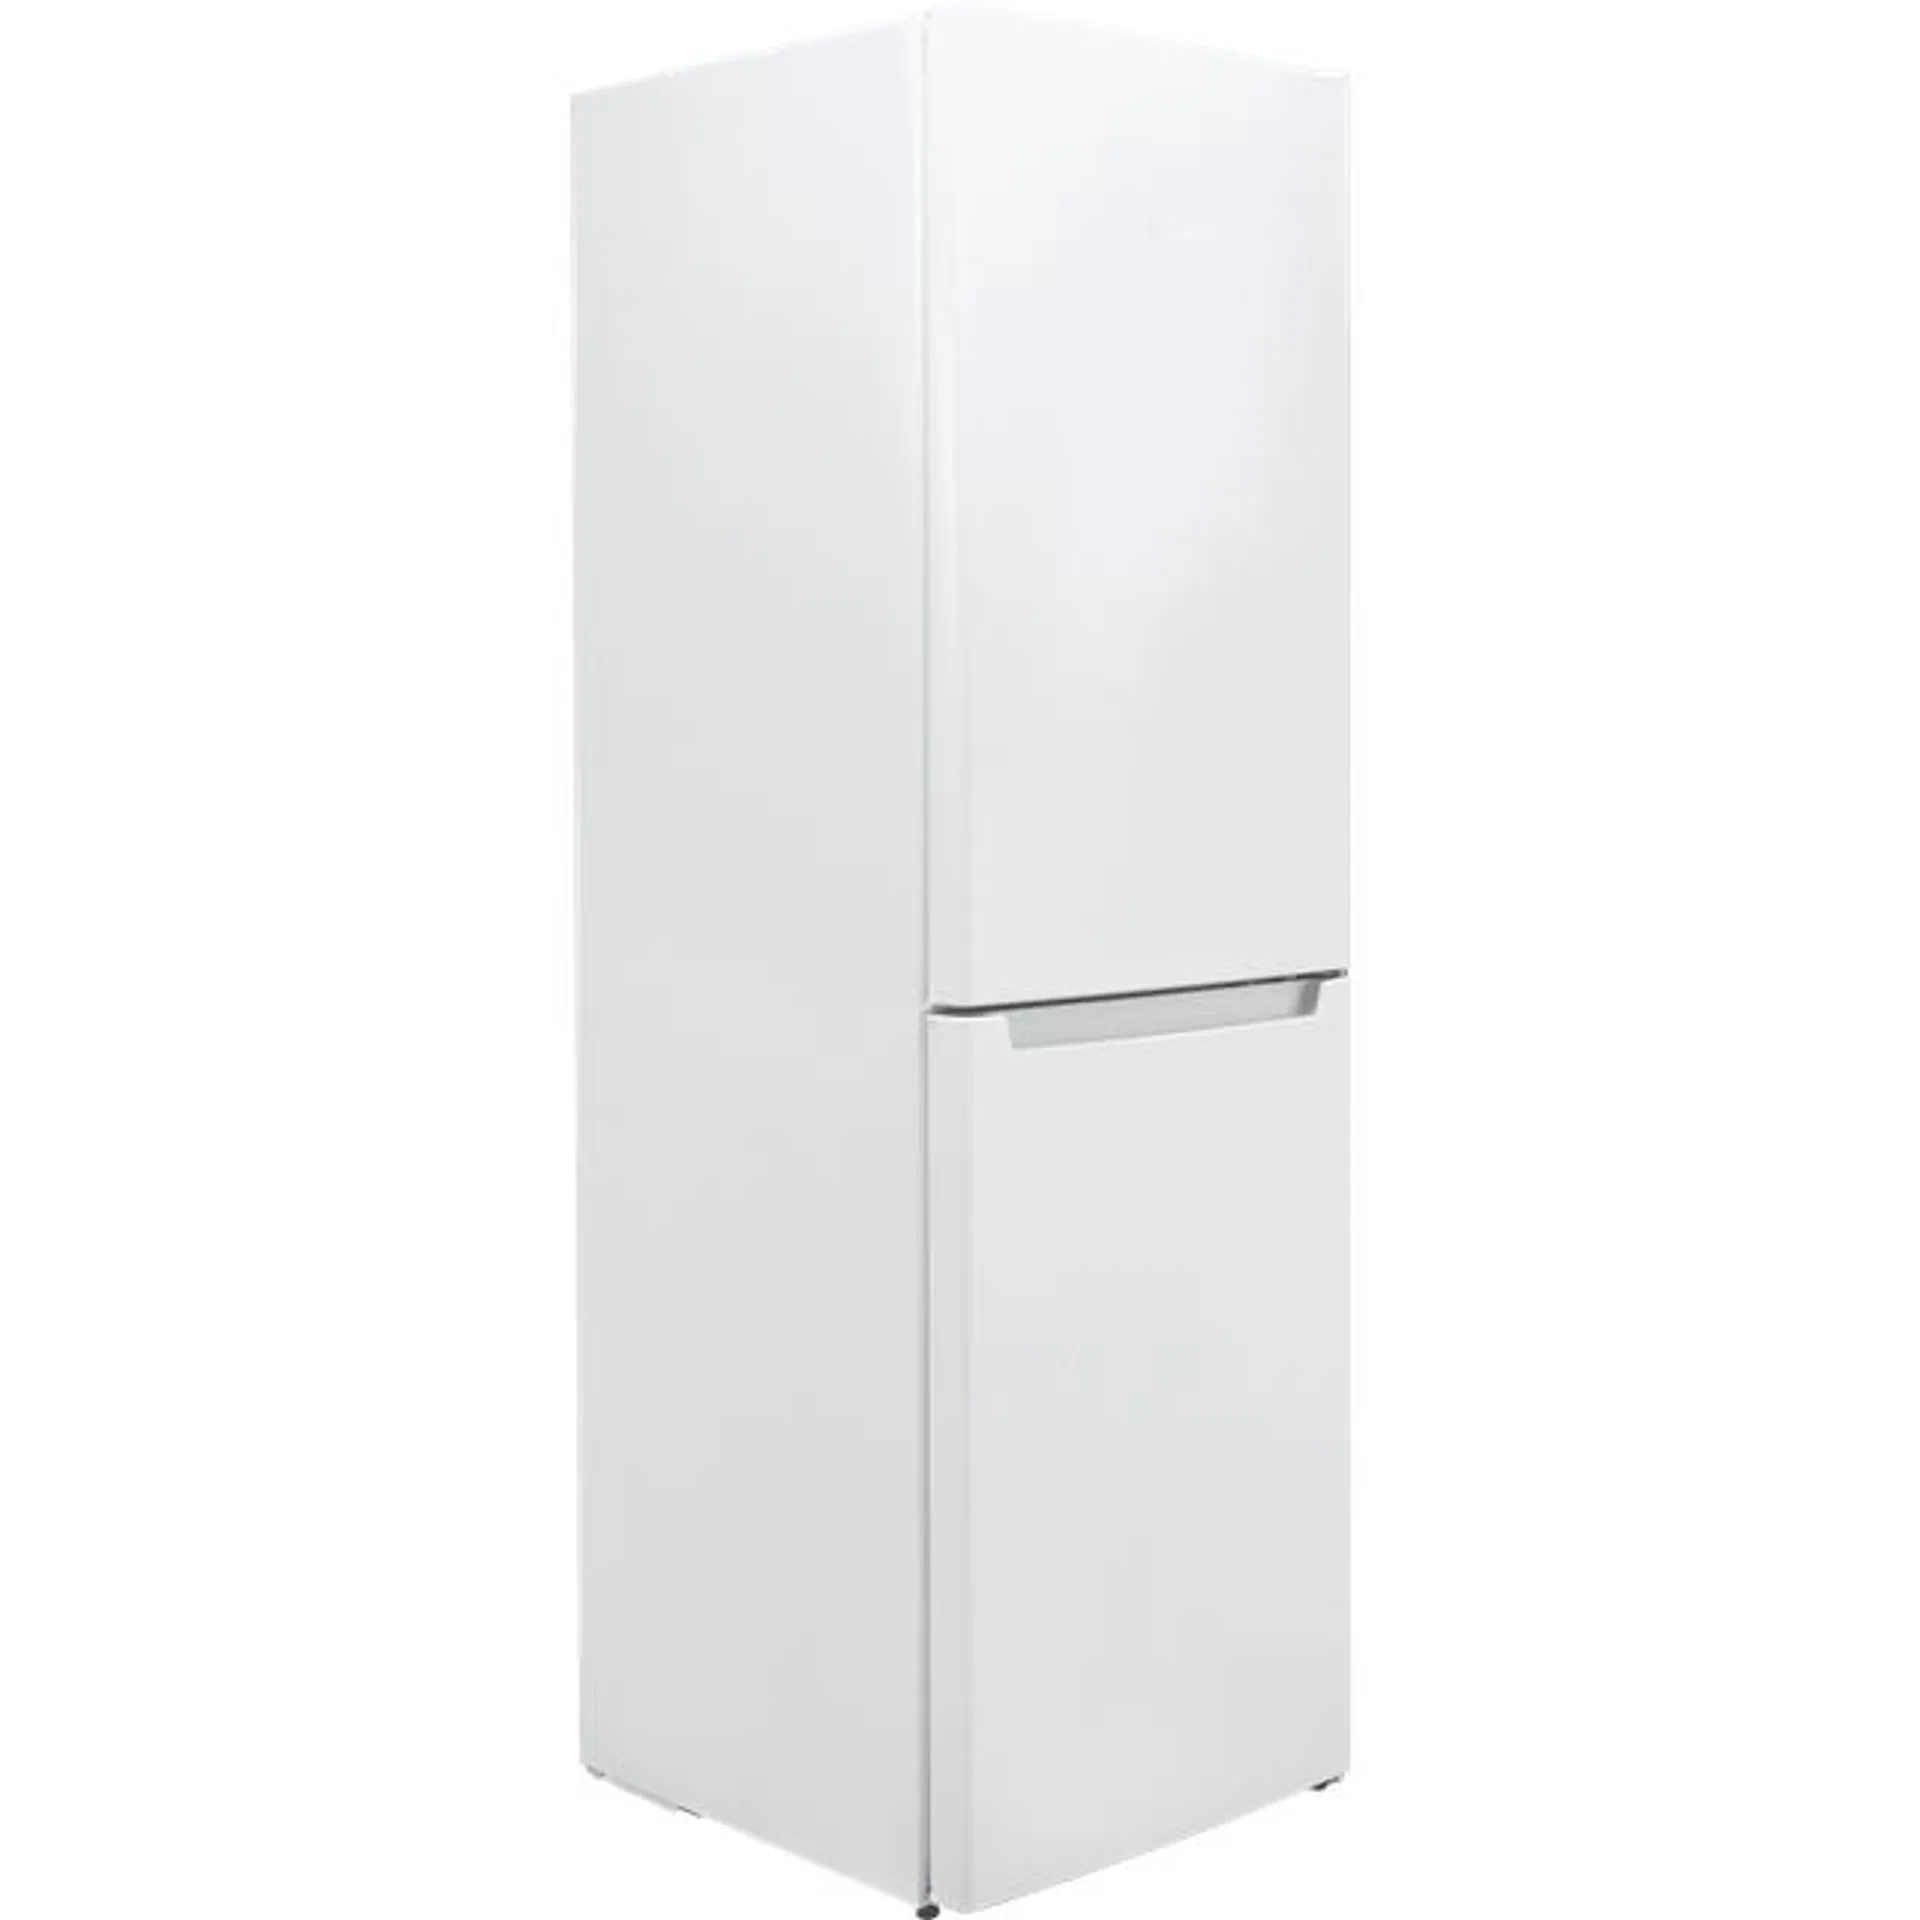 Bosch Series 2 KGN34NWEAG 50/50 Frost Free Fridge Freezer - White - E Rated